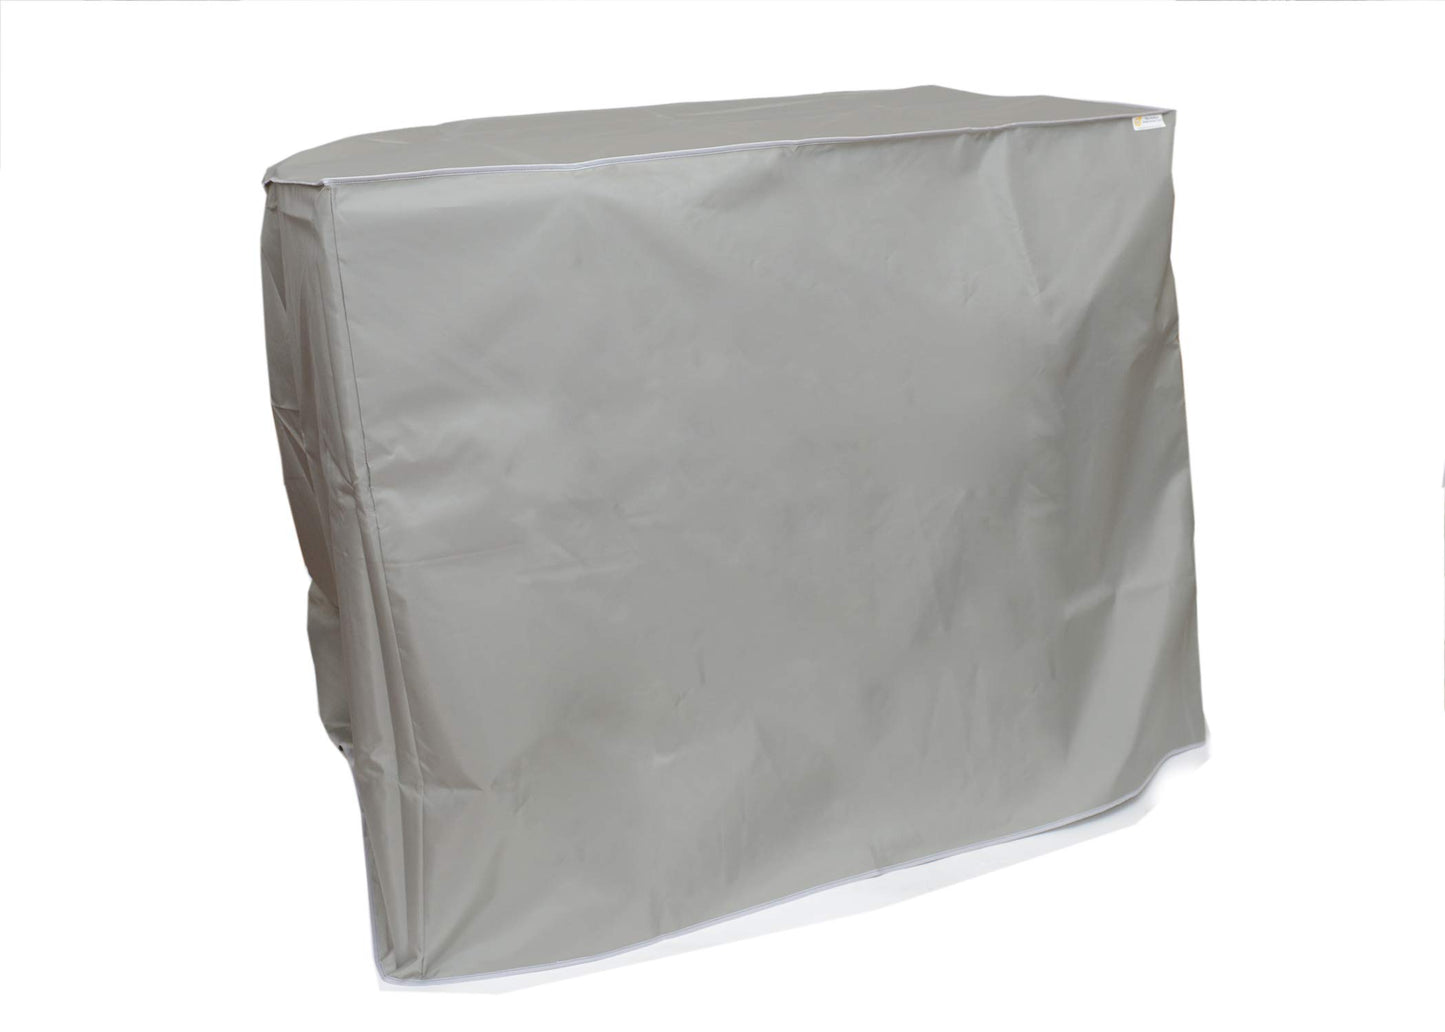 The Perfect Dust Cover, Silver Gray Nylon Cover for HP DesignJet Z9 44-in Postscript Printer, Anti Static Waterproof Cover, Dimensions 71''W x 27.4''D x 39.3''H by The Perfect Dust Cover LLC